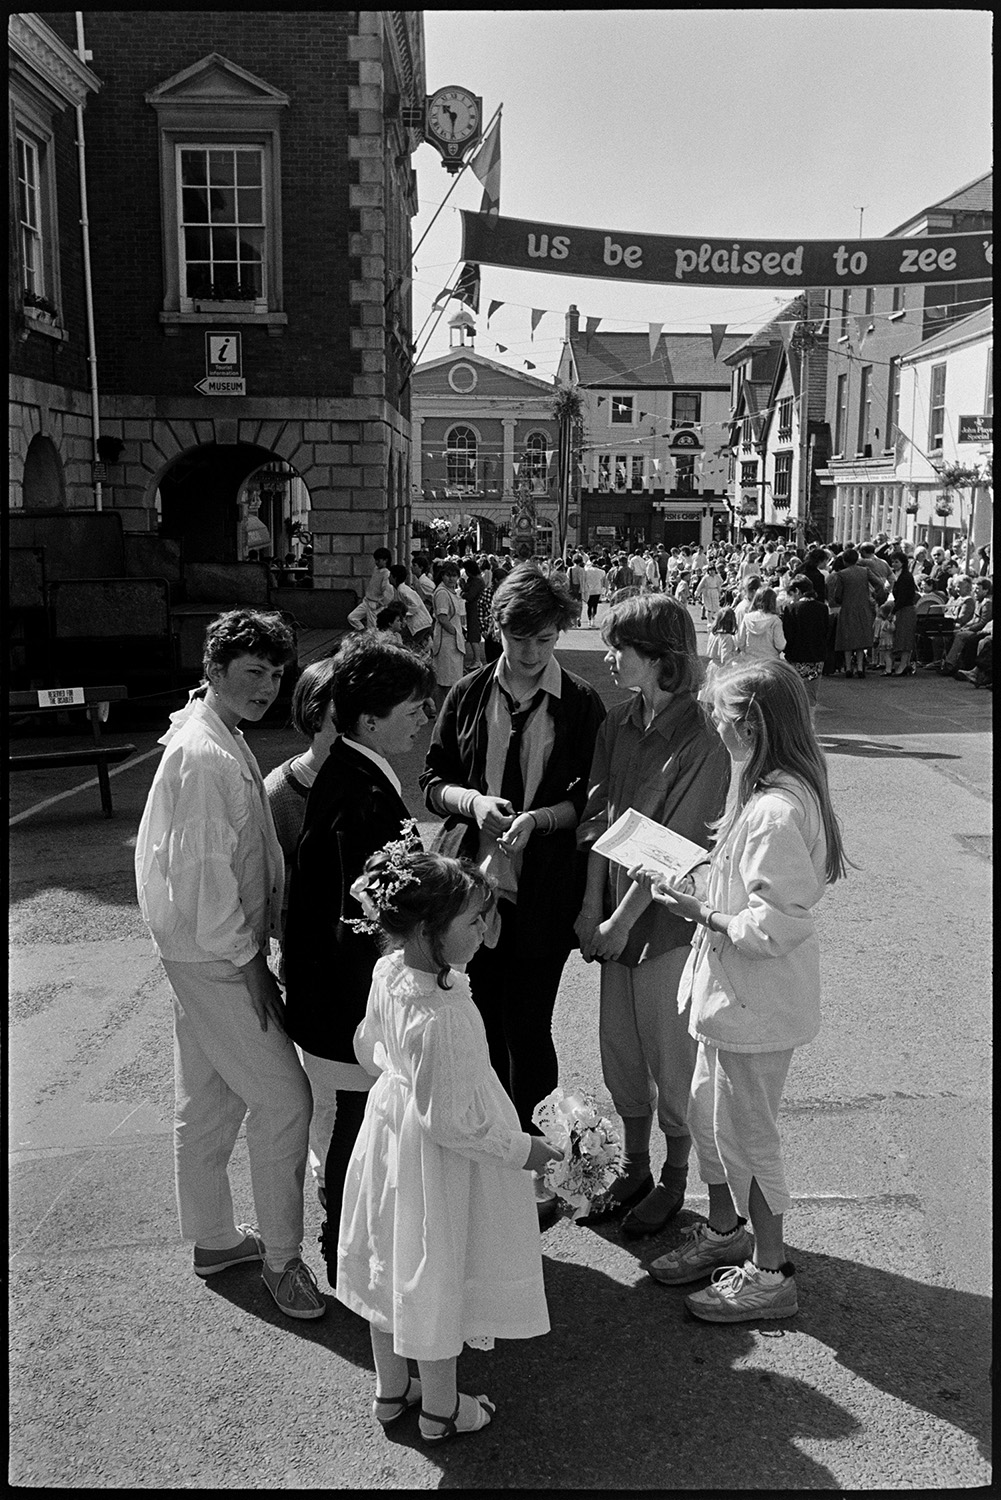 May Fair celebrations, people waiting for start of fair, preparing float. 
[A group of children talking by a young girl wearing a white dress and holding a posie of flowers, possibly one of the May Fair Queen attendants at Torrington May Fair. The Town Hall and square, which is decorated with bunting, can be seen in the background. People are gathered in the square and a banner is hung across the street.]